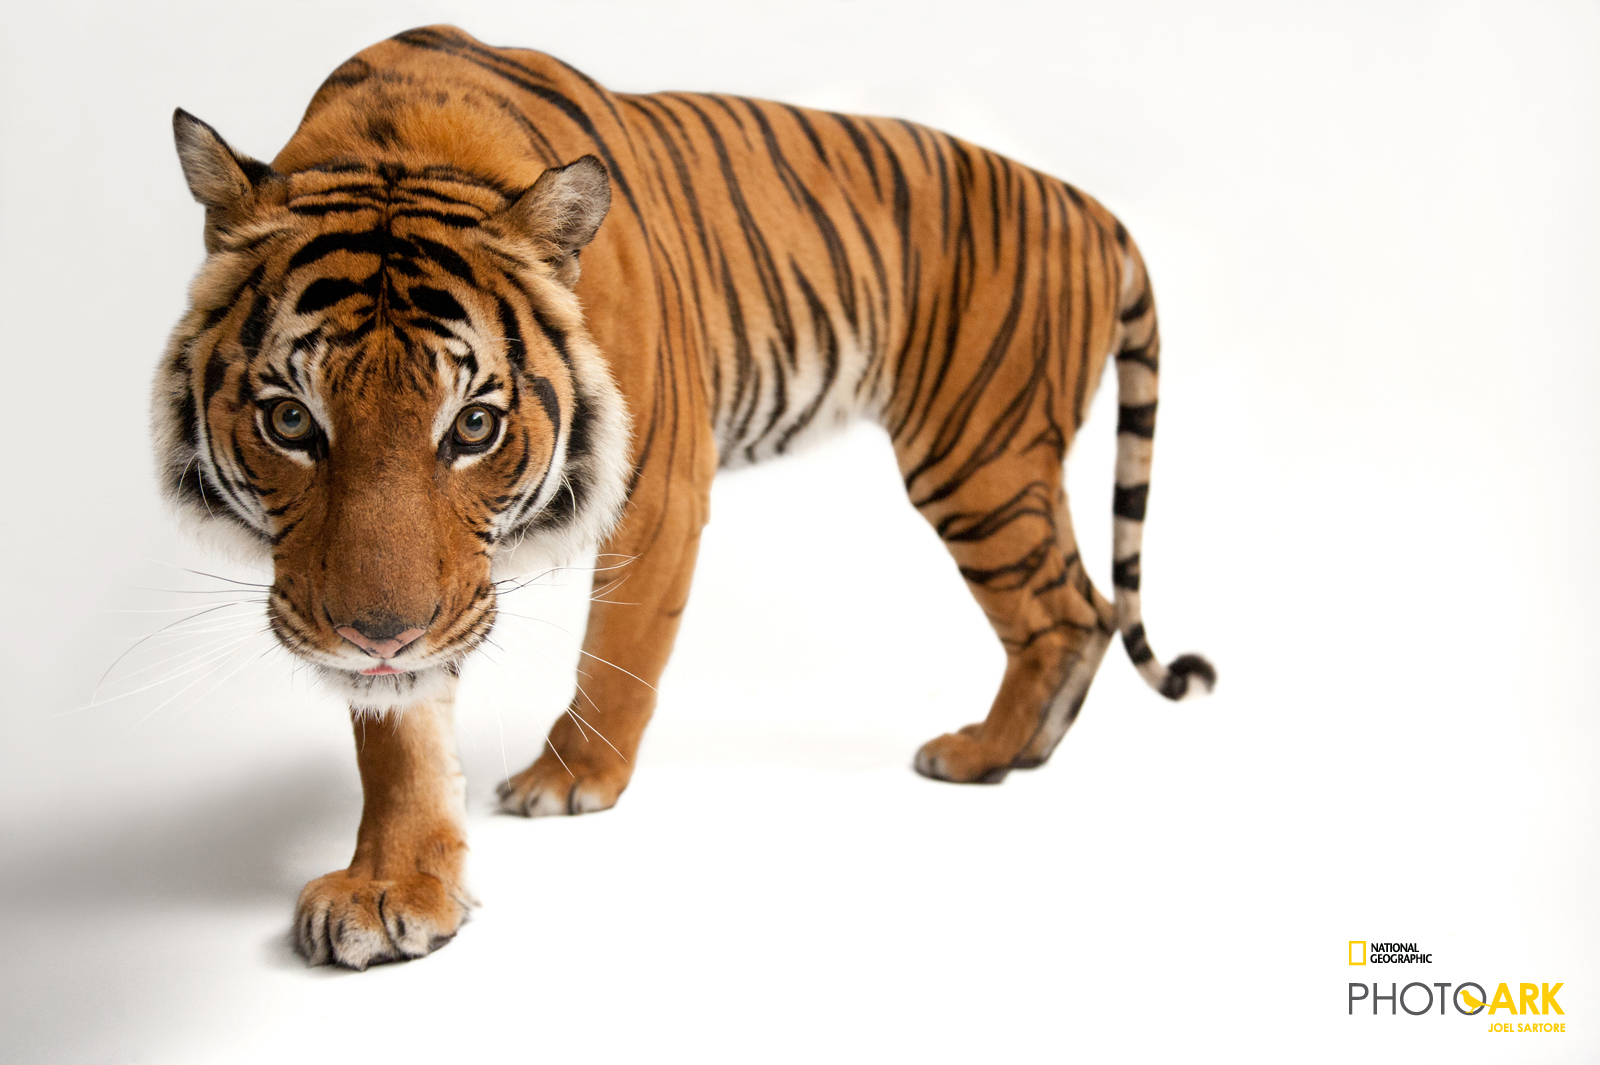 Portrait of Malayan tiger from Joel Sartore's Photo Ark project